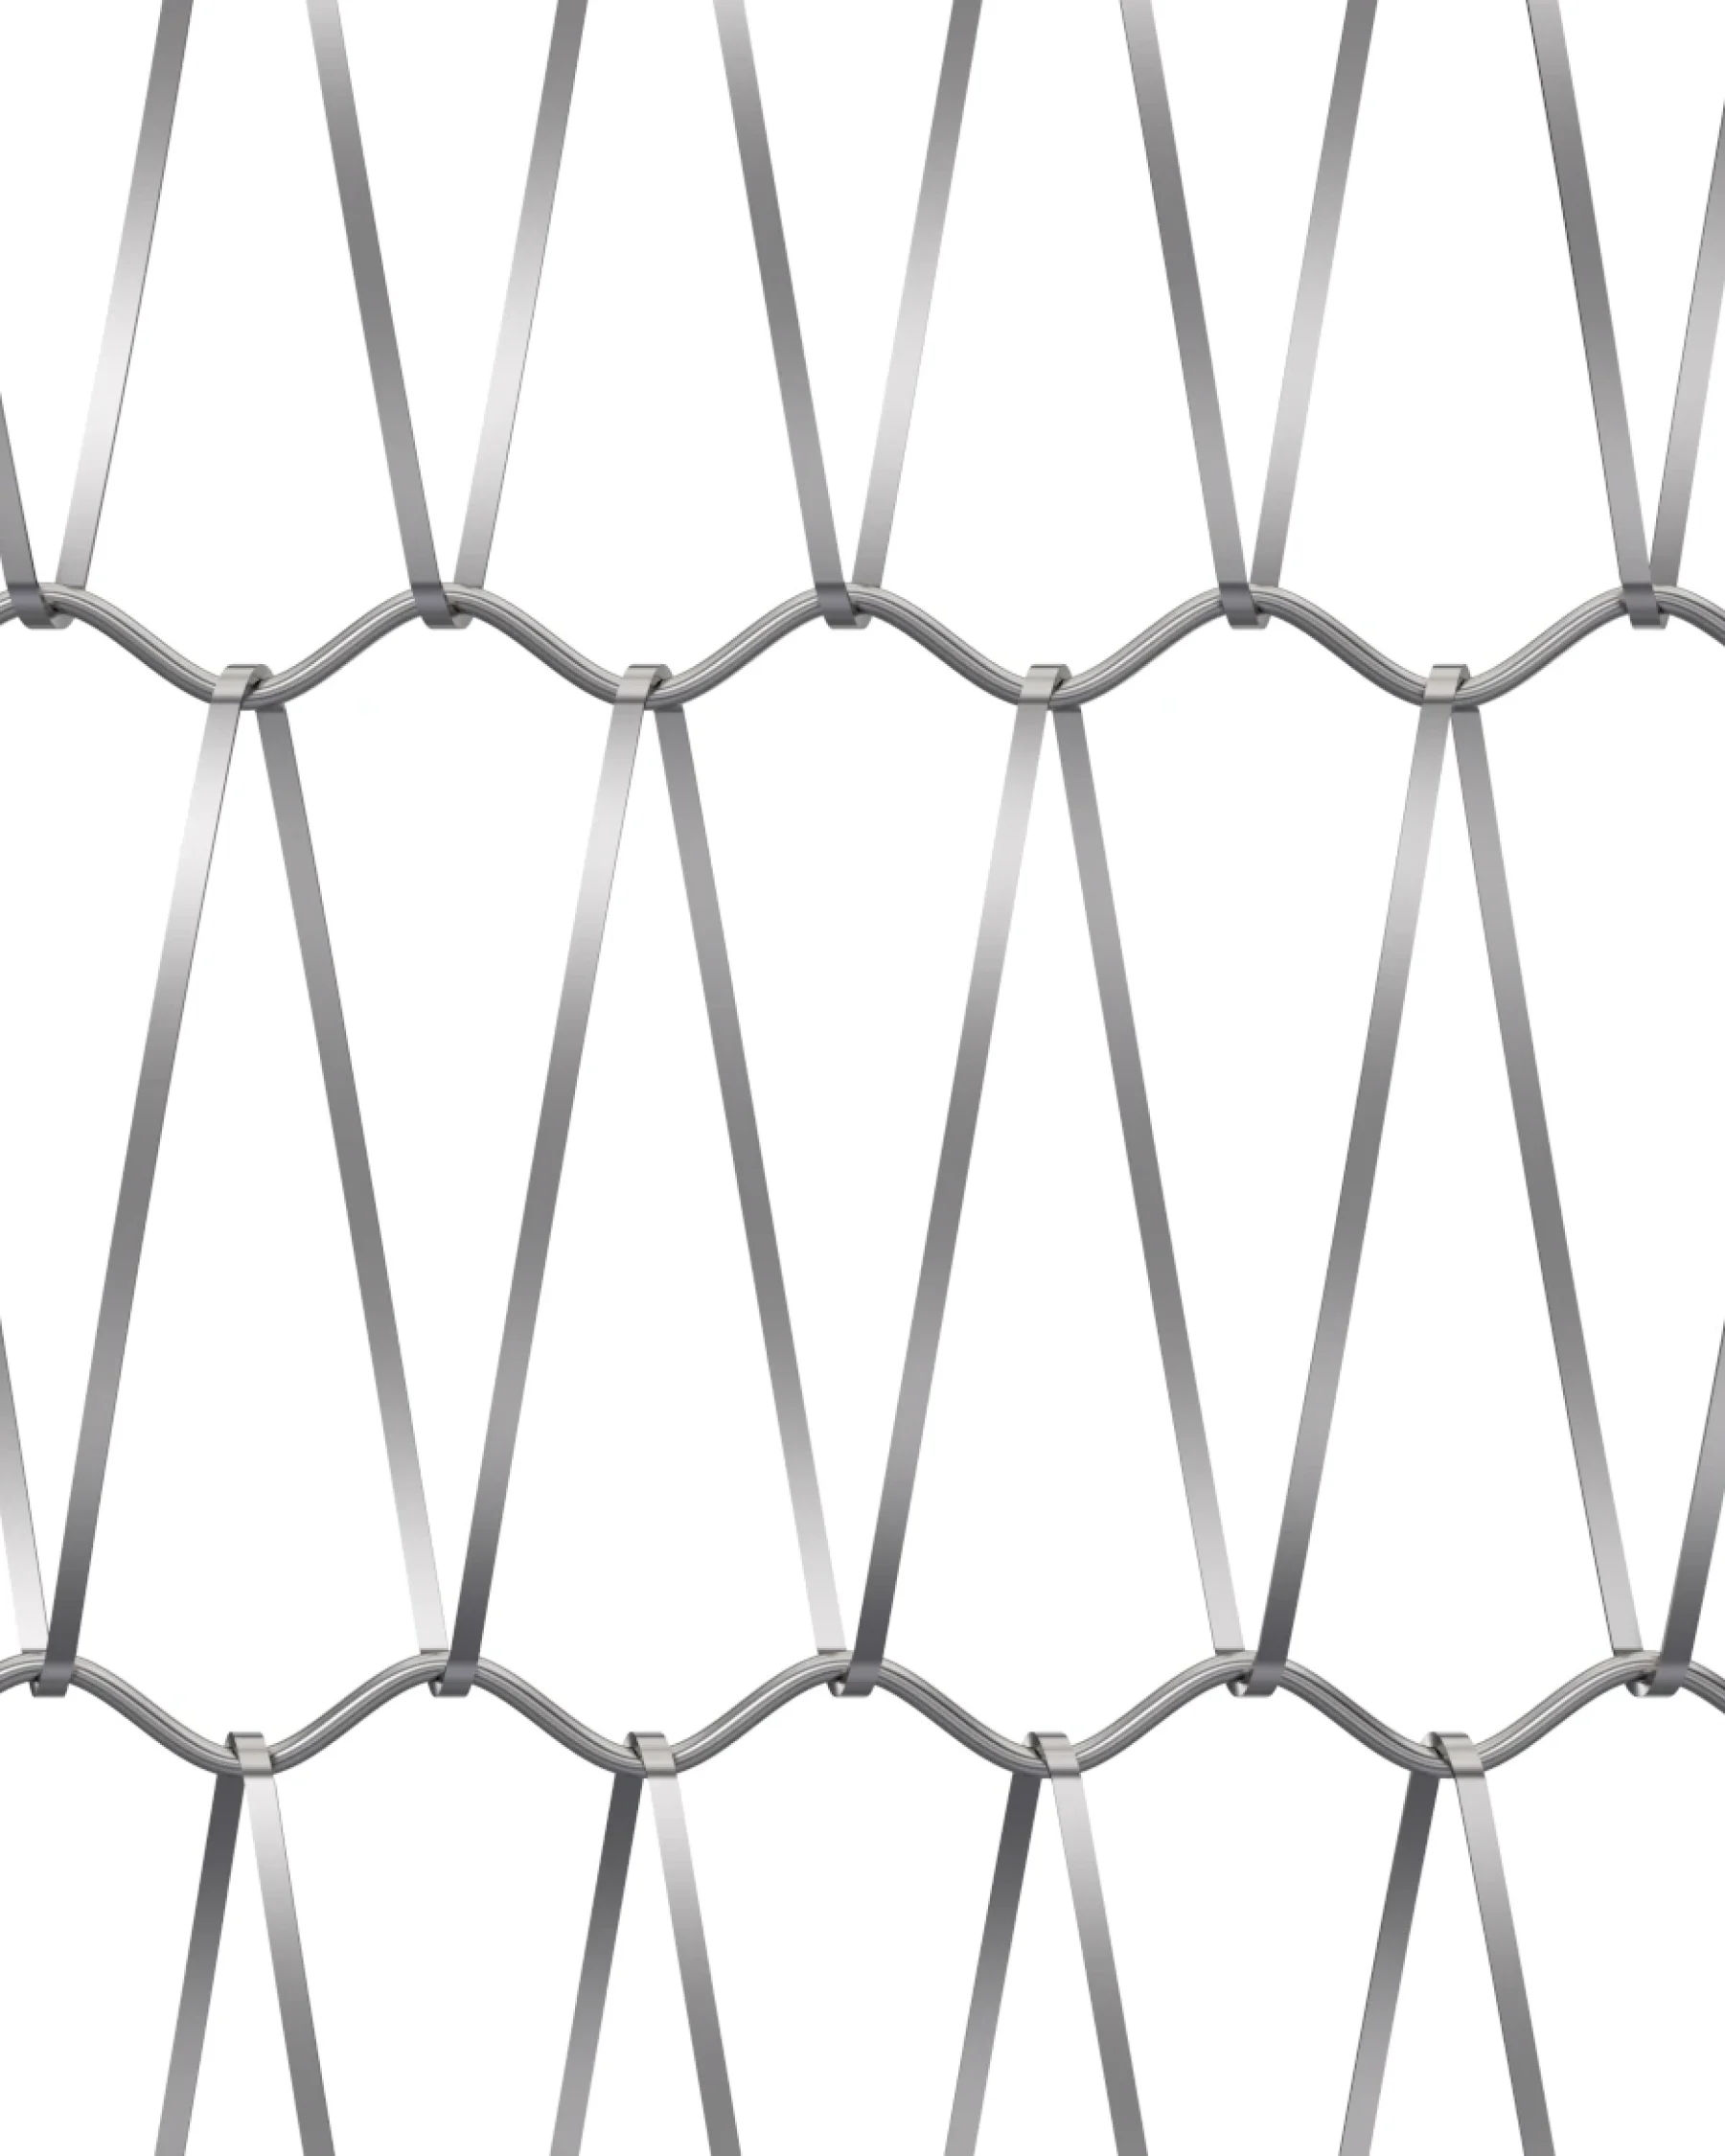 Stainless steel variant of 40100 Lite Mesh by Codina Architectural, representing versatility and cost-effectiveness. Ideal solution for various project requirements